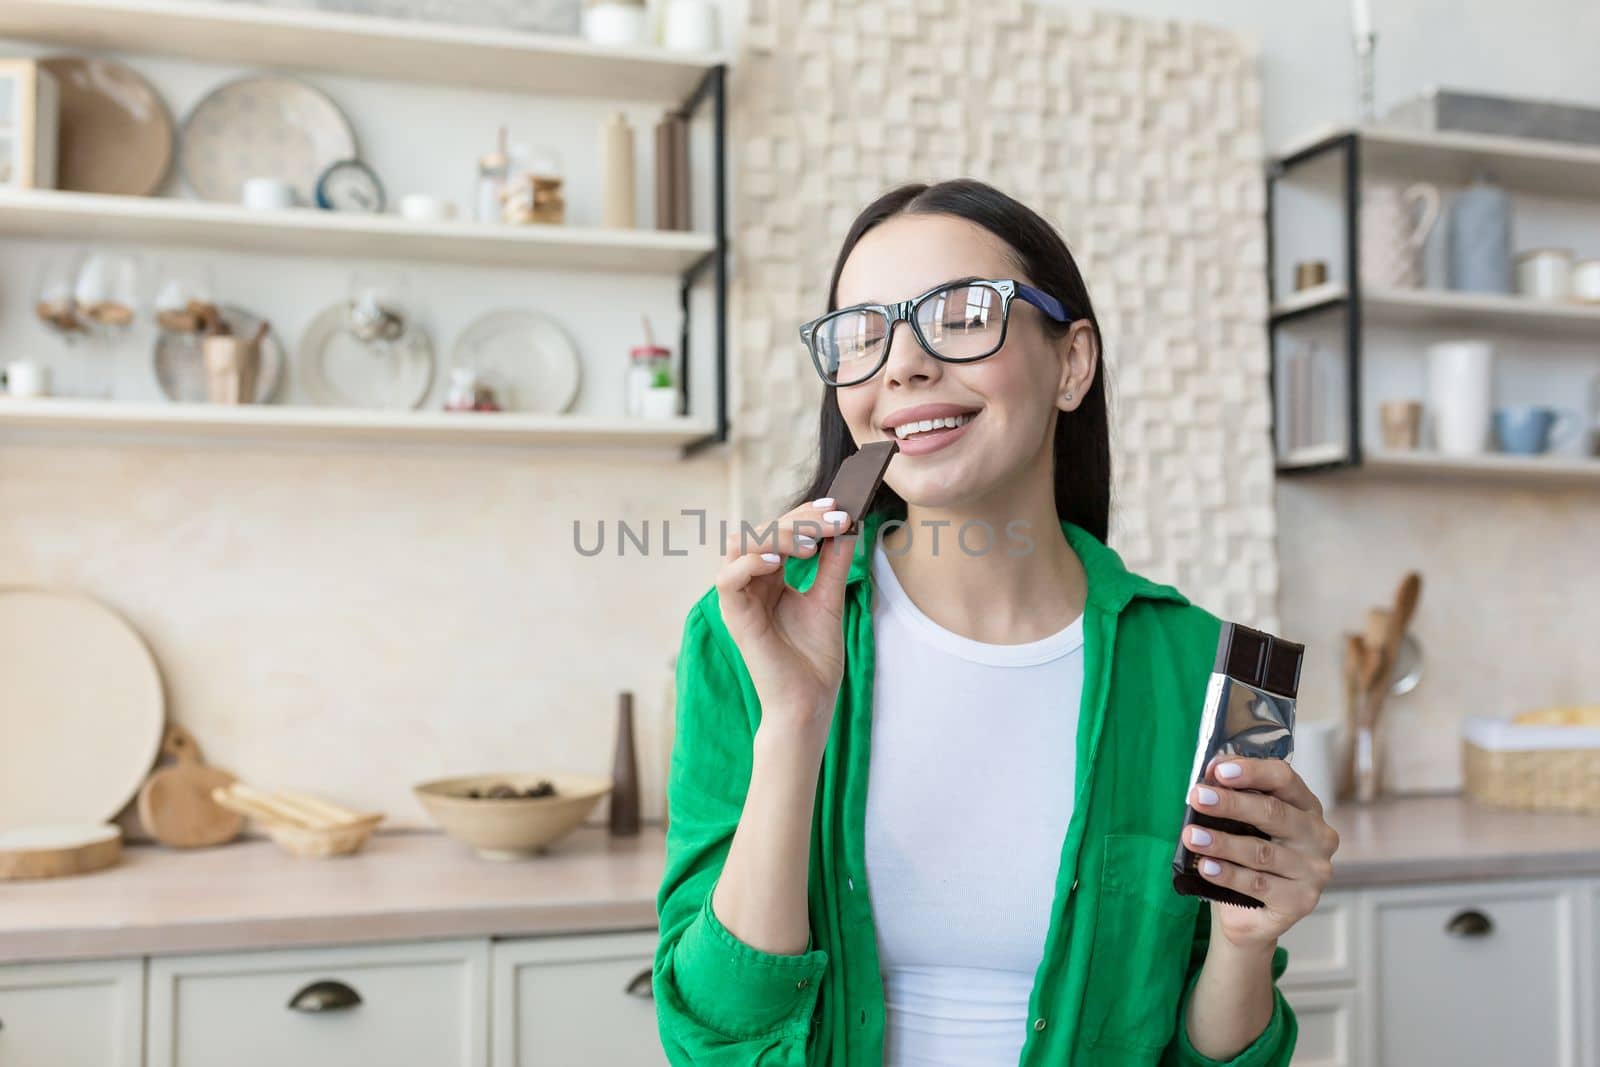 Portrait of a young beautiful woman in glasses eating a piece of black chocolate, holding a tile in her hands. Standing at home in the kitchen, eyes closed, enjoying.